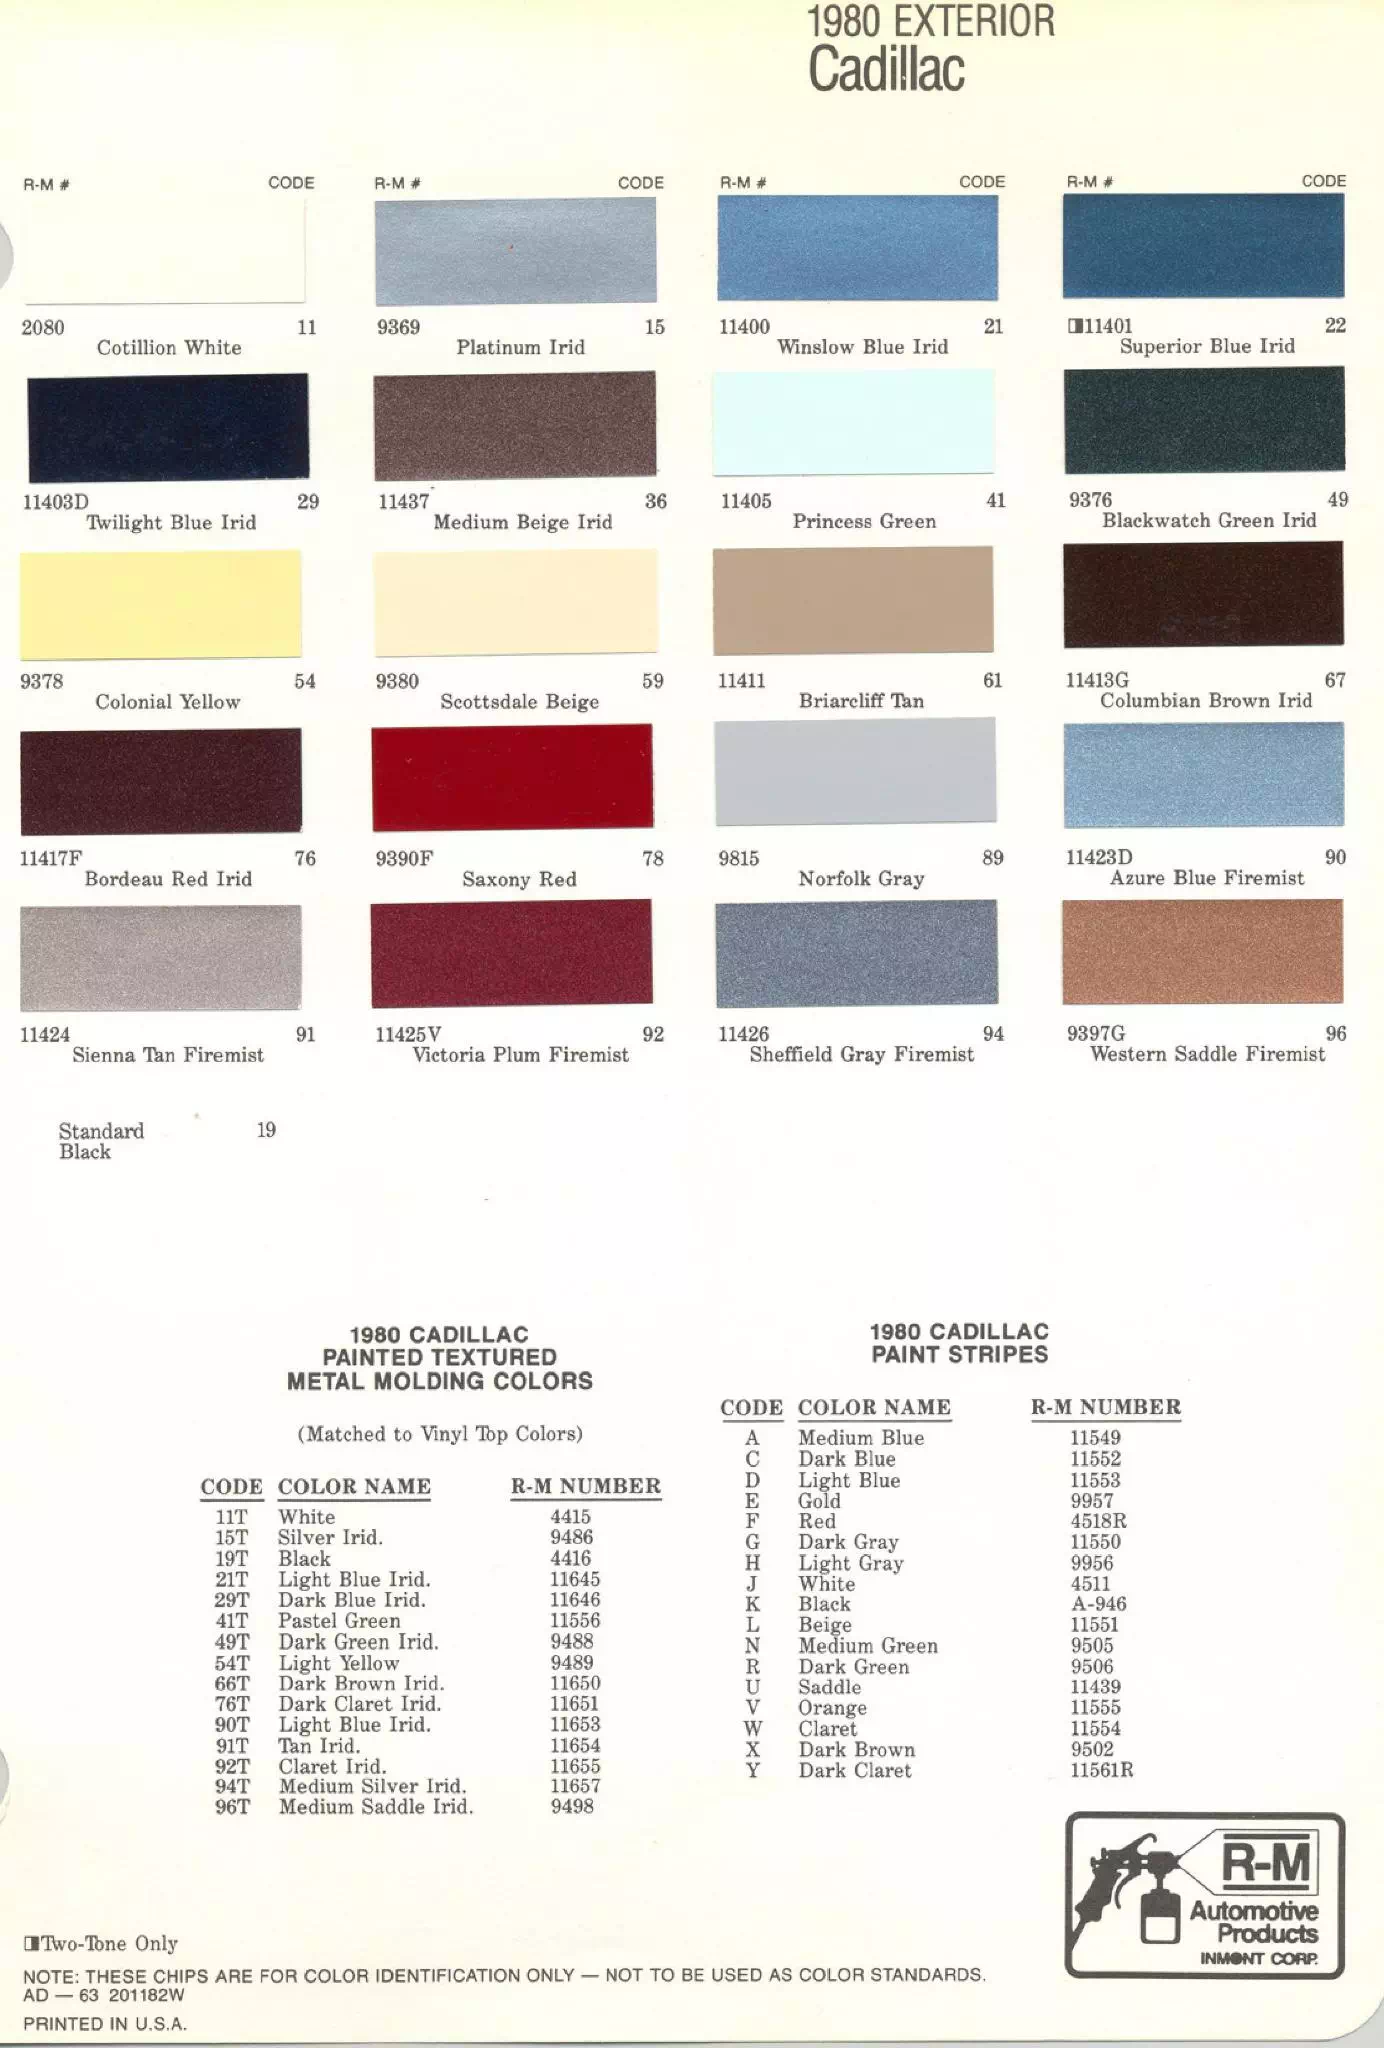 General Motors oem paint swatches, color codes and color names for 1980 vehicles.